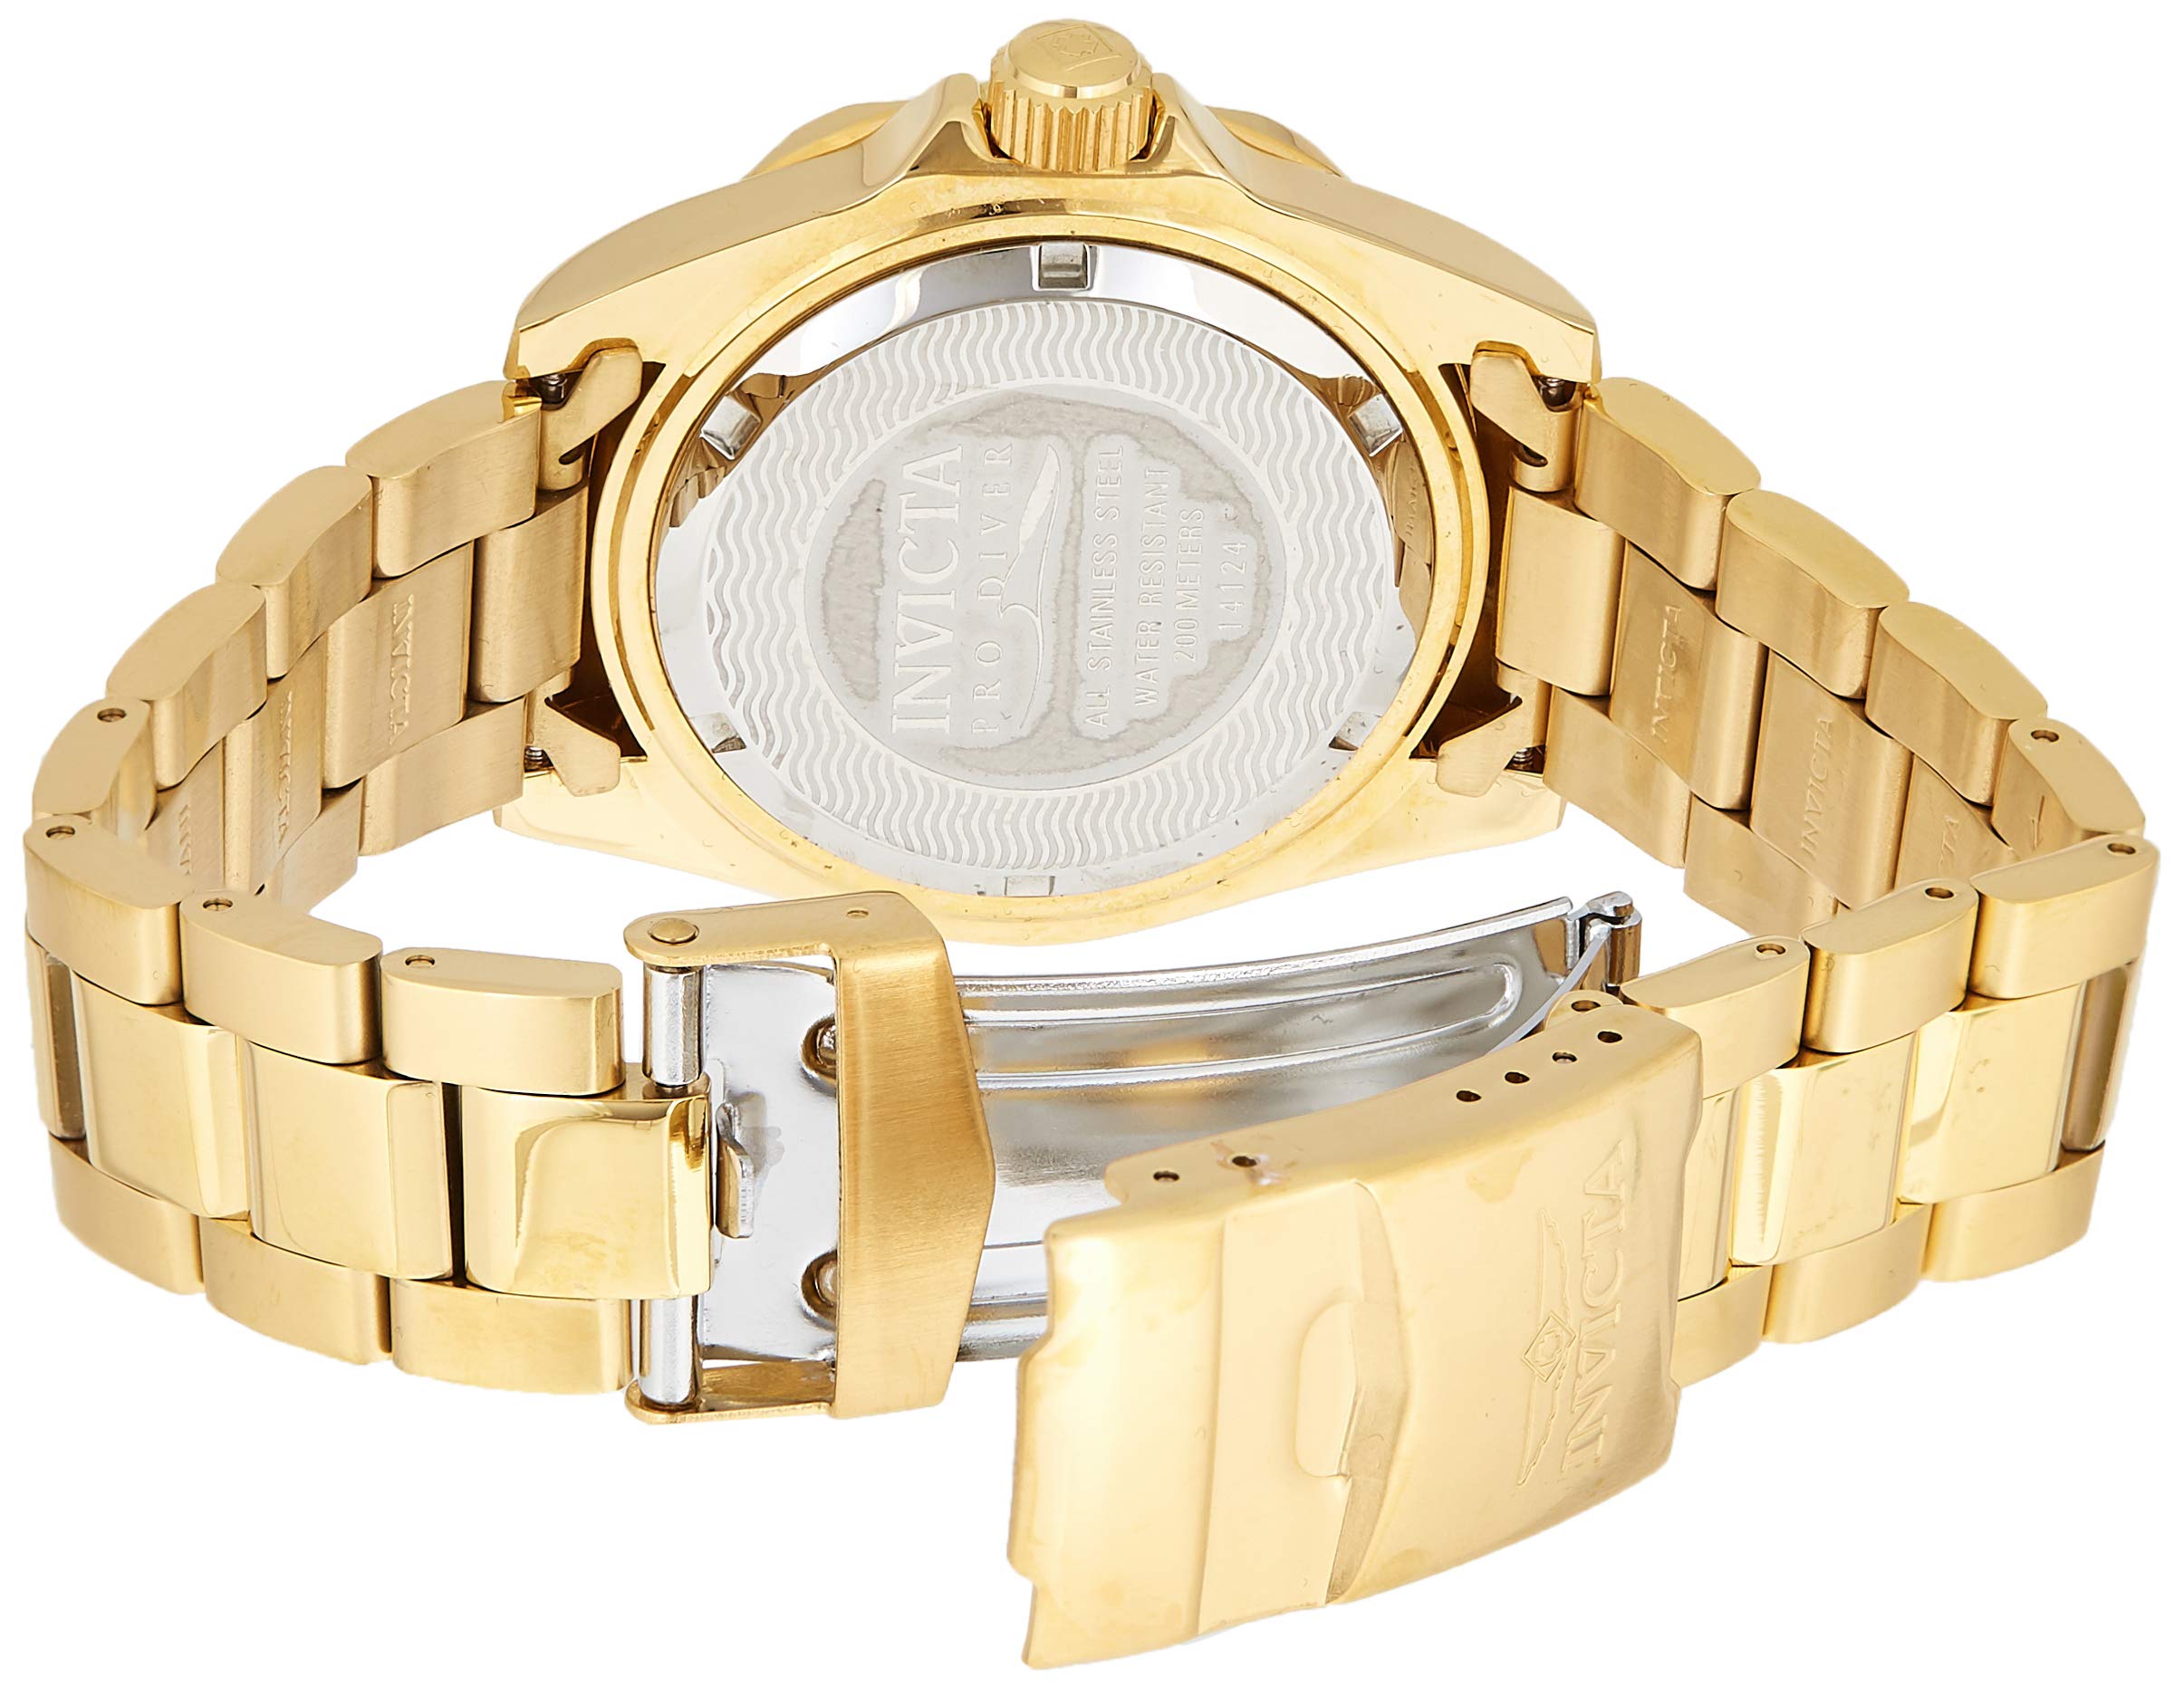 Invicta Men's 14124 Pro Diver Gold Dial 18k Gold Ion-Plated Stainless Steel Watch